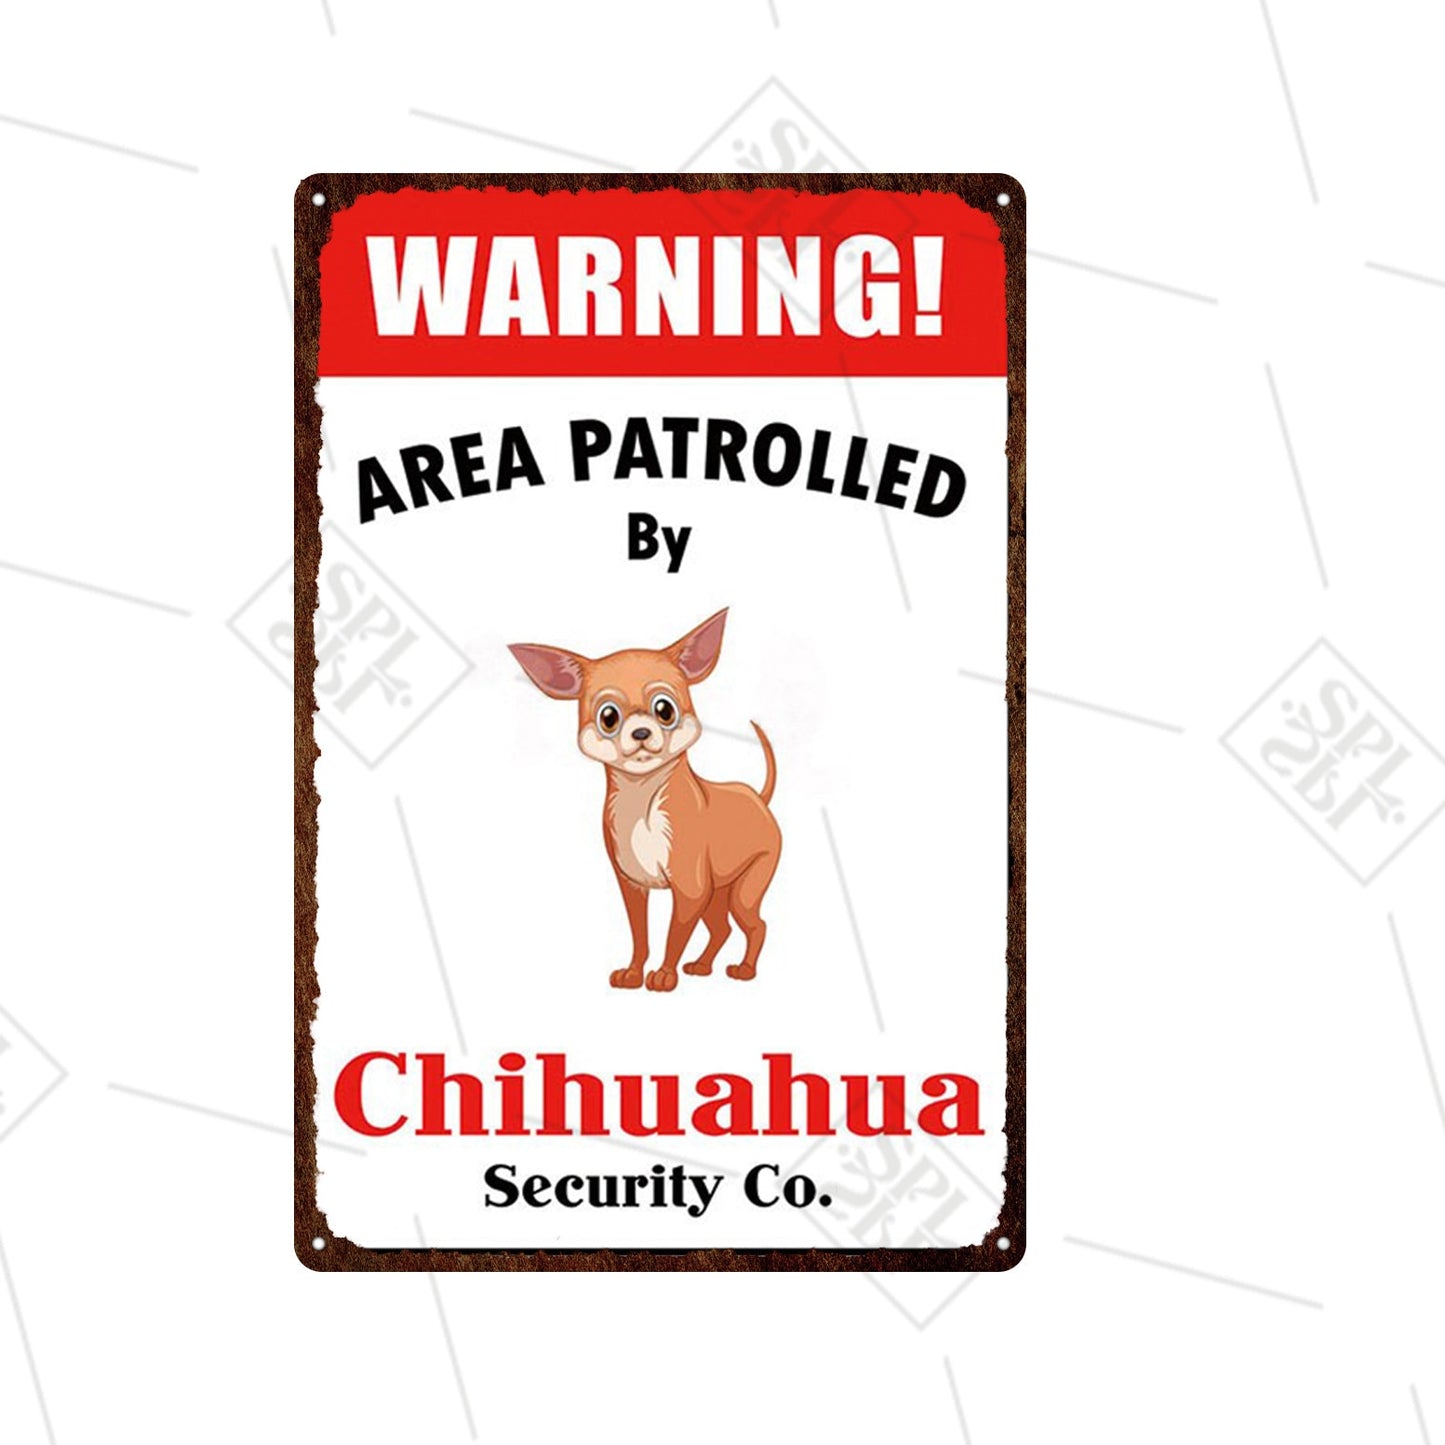 "Warning Area Patrolled by 'Dog' Security & Co" signs - Style's Bug Chihuahua